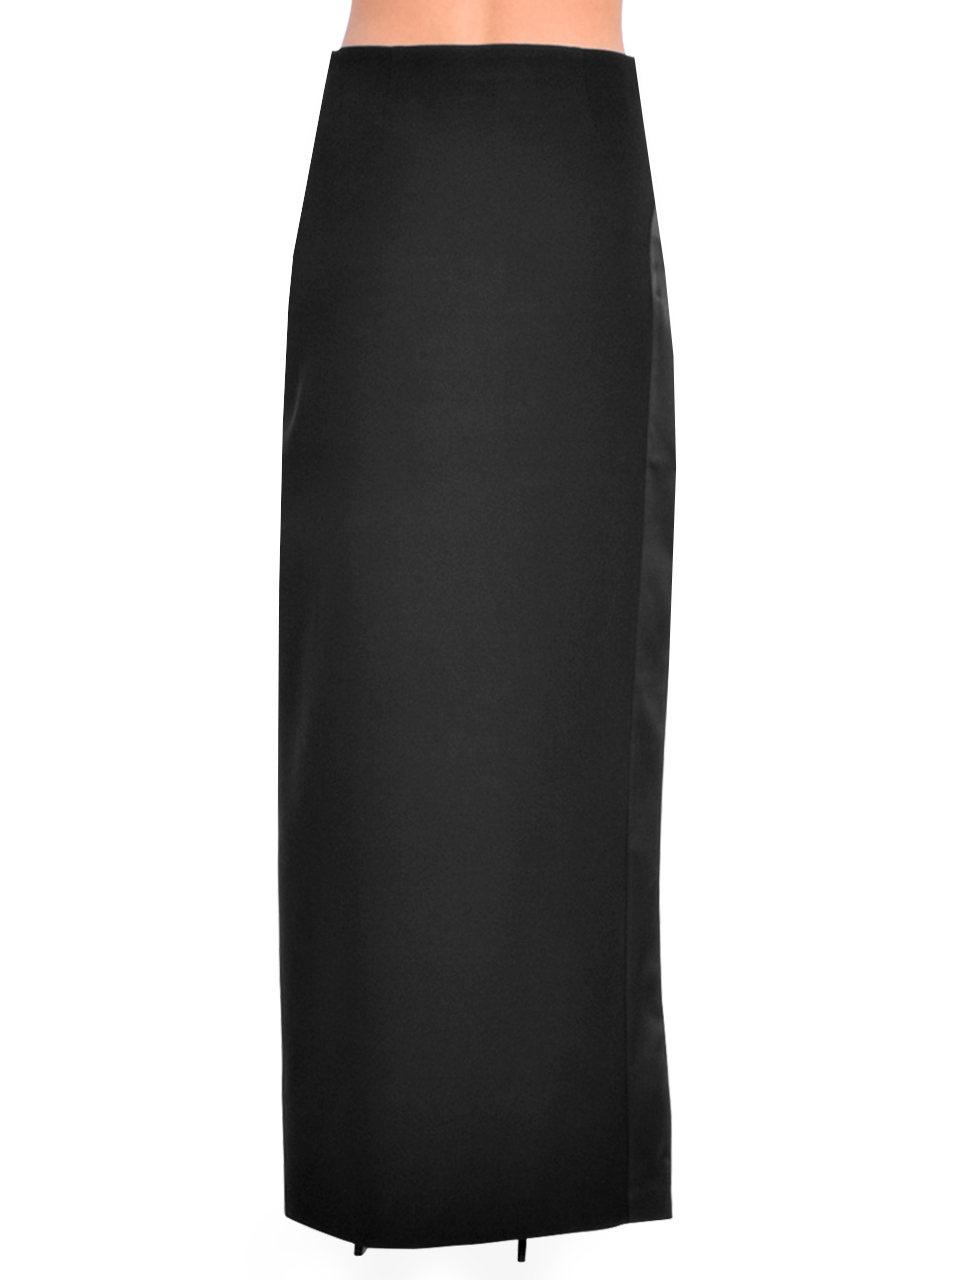 RETROFETE Cindy Skirt in Black Back View 